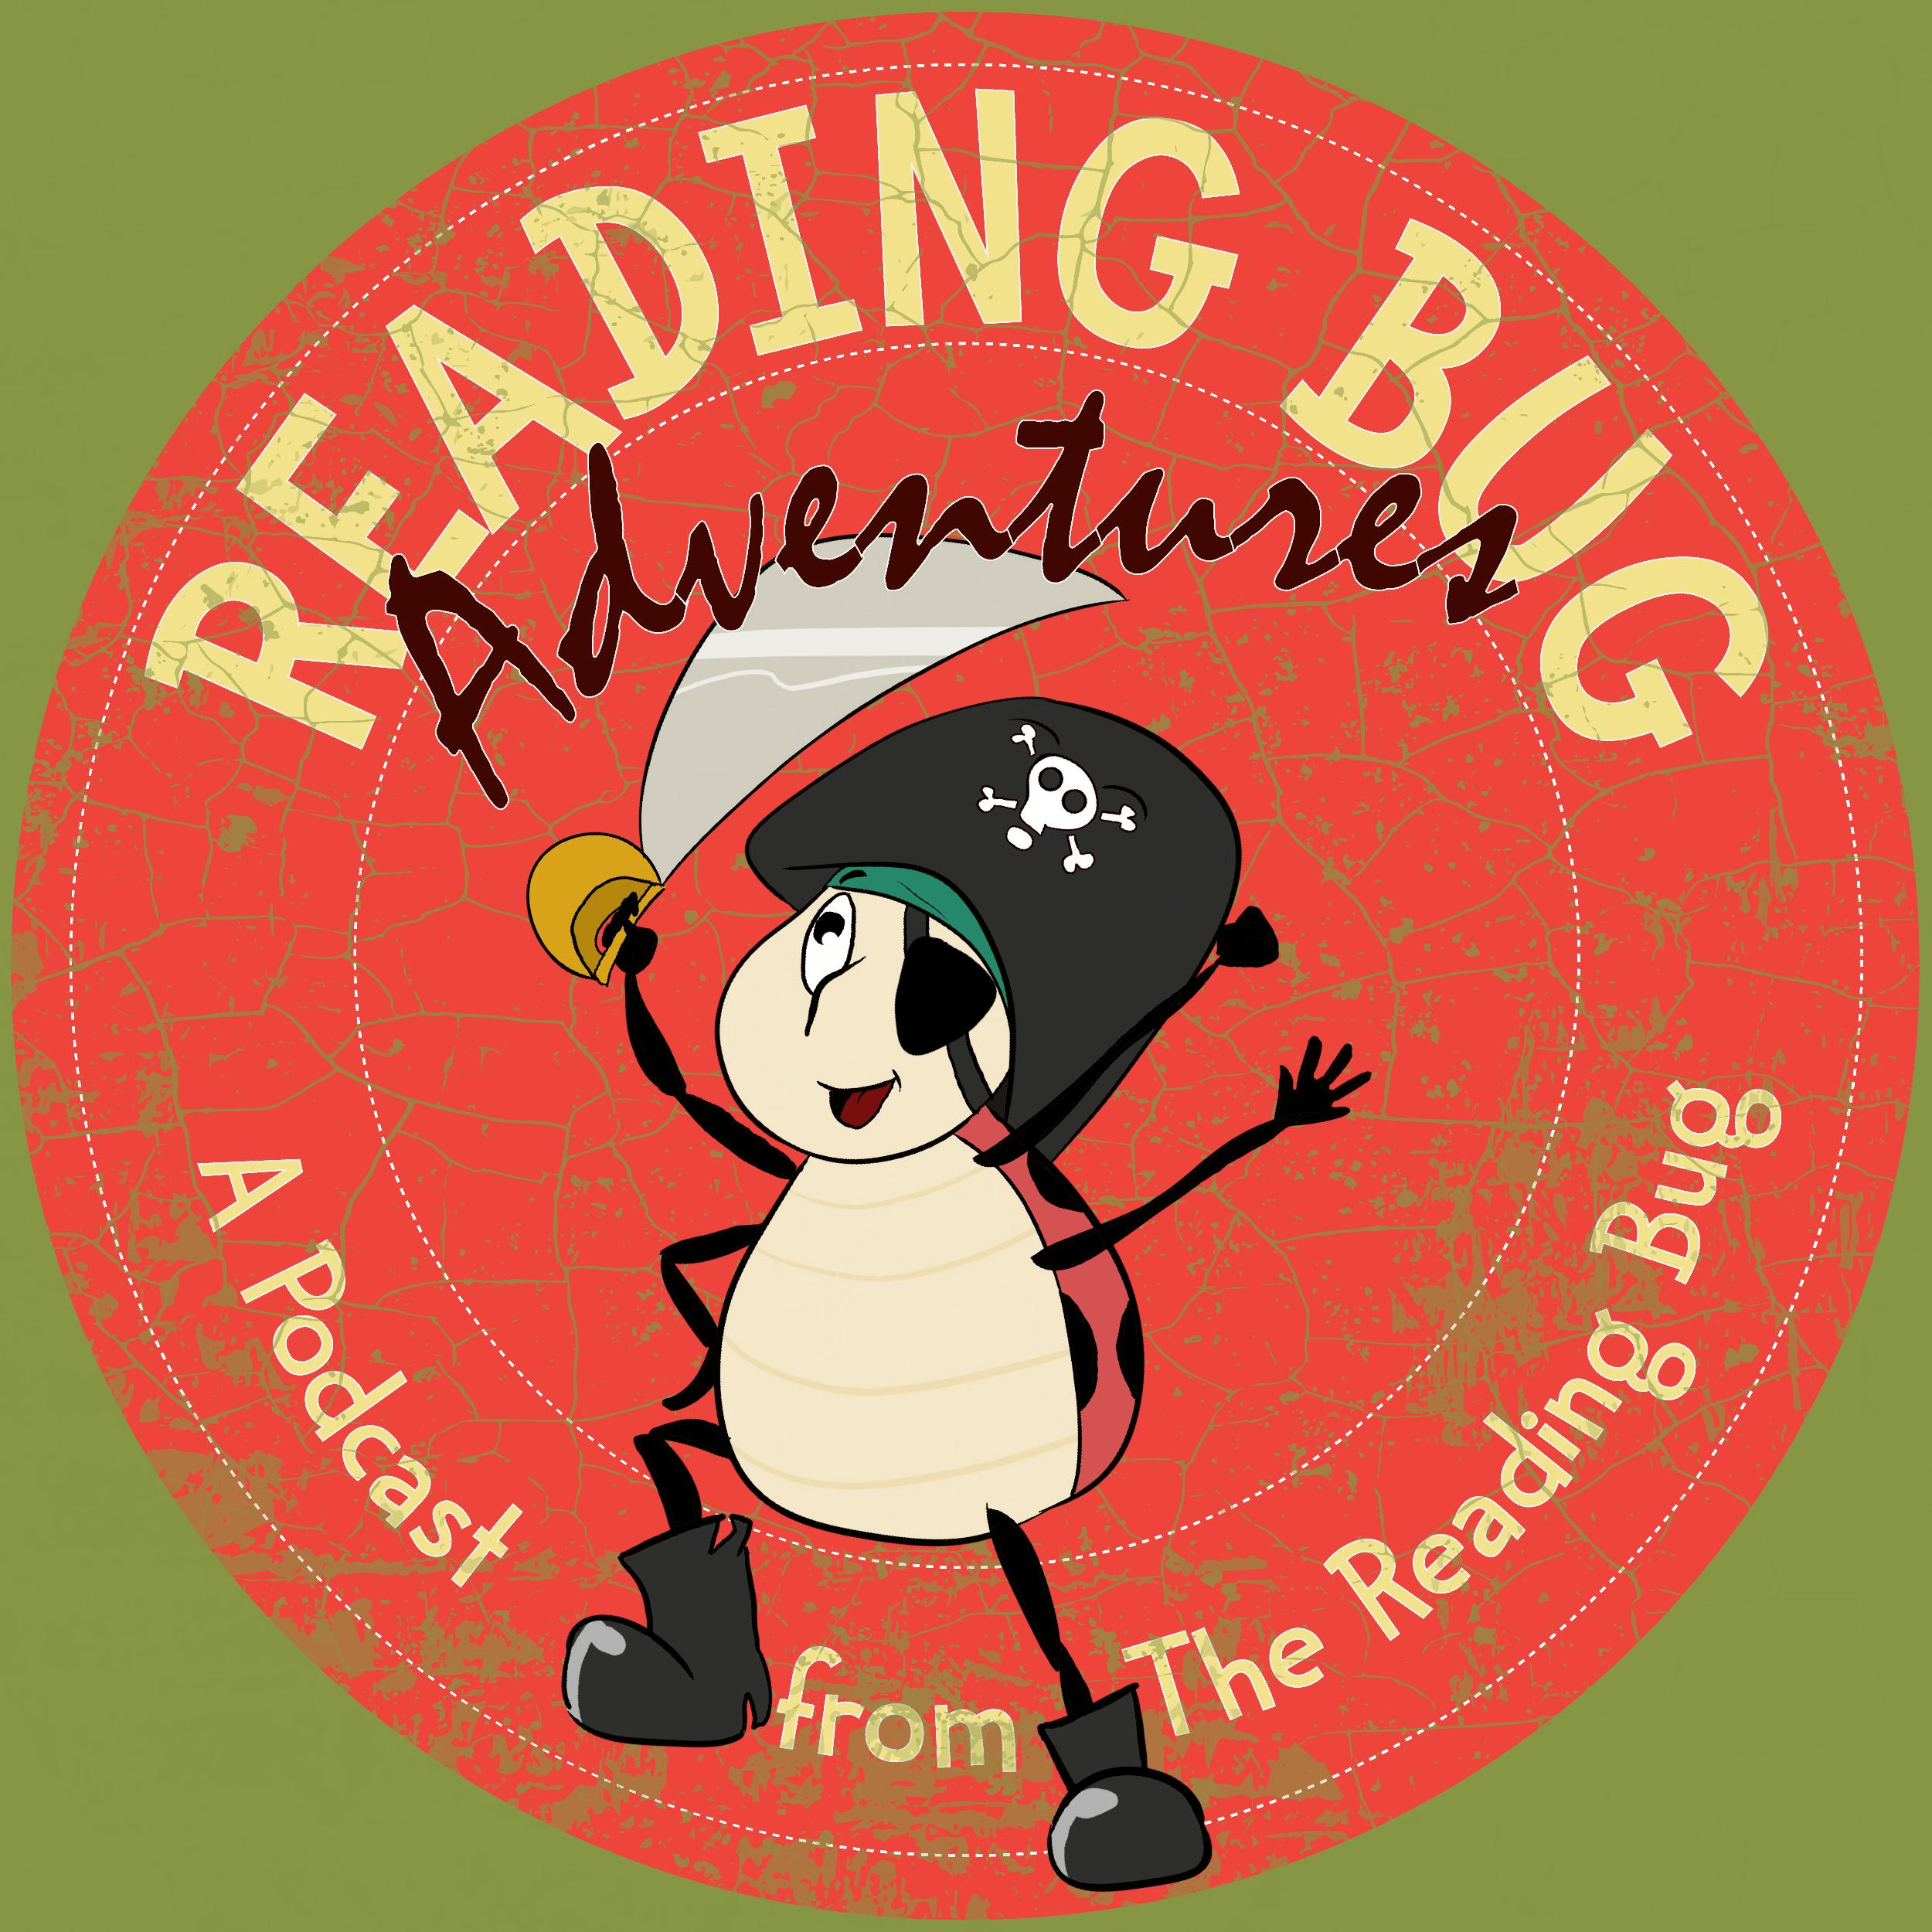 Reading Bug Adventures -  Original Stories with Music for Kids:The Reading Bug